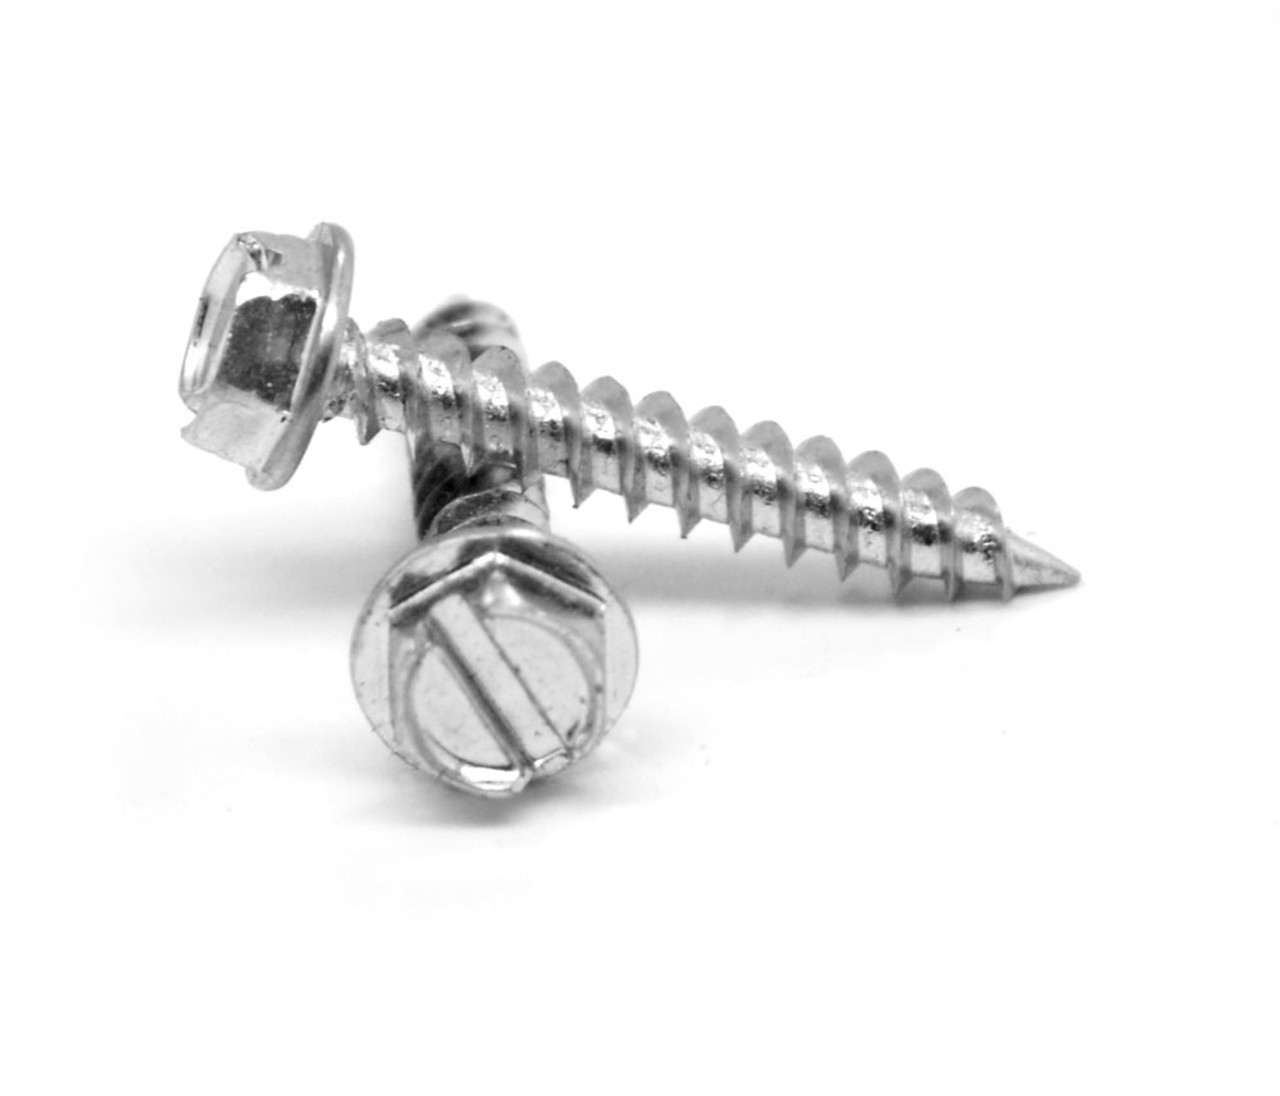 #8-15 x 3" (FT) 1/4" AF Self-Piercing Sheet Metal Screw Slotted Hex Washer Head Low Carbon Steel Zinc Plated